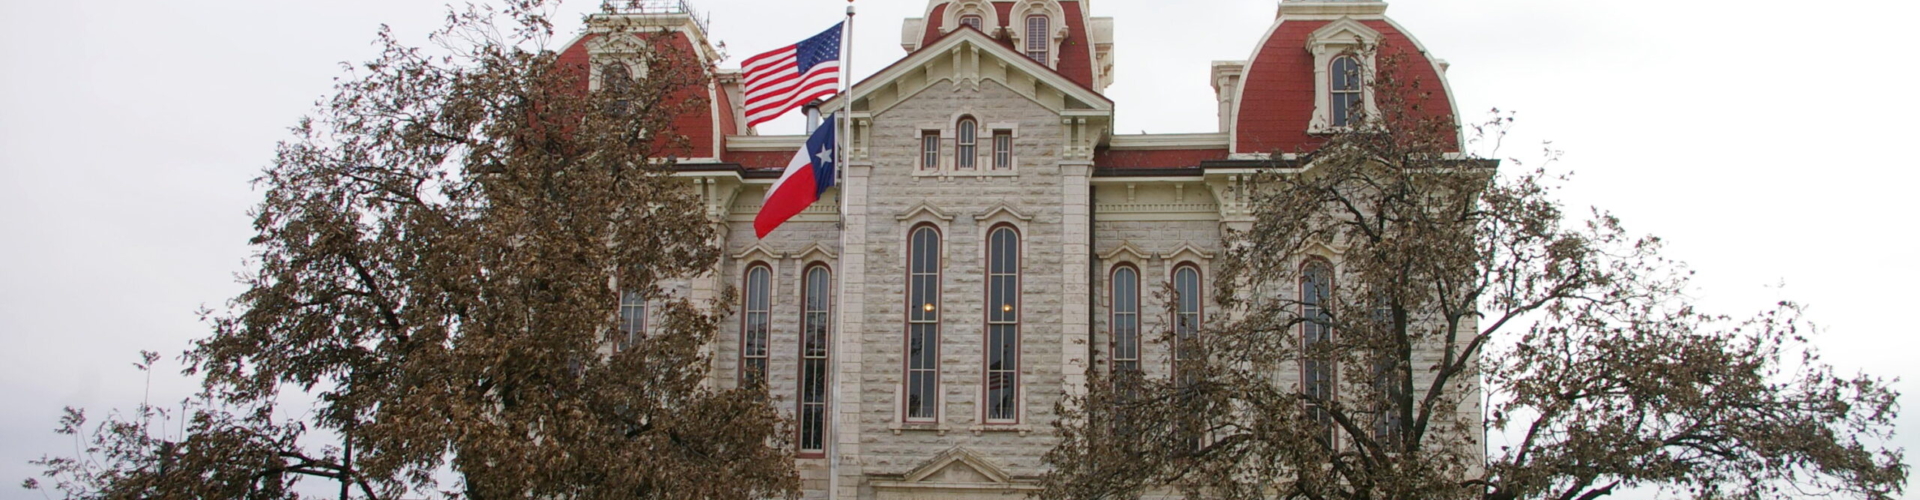 parker-county-courthouse